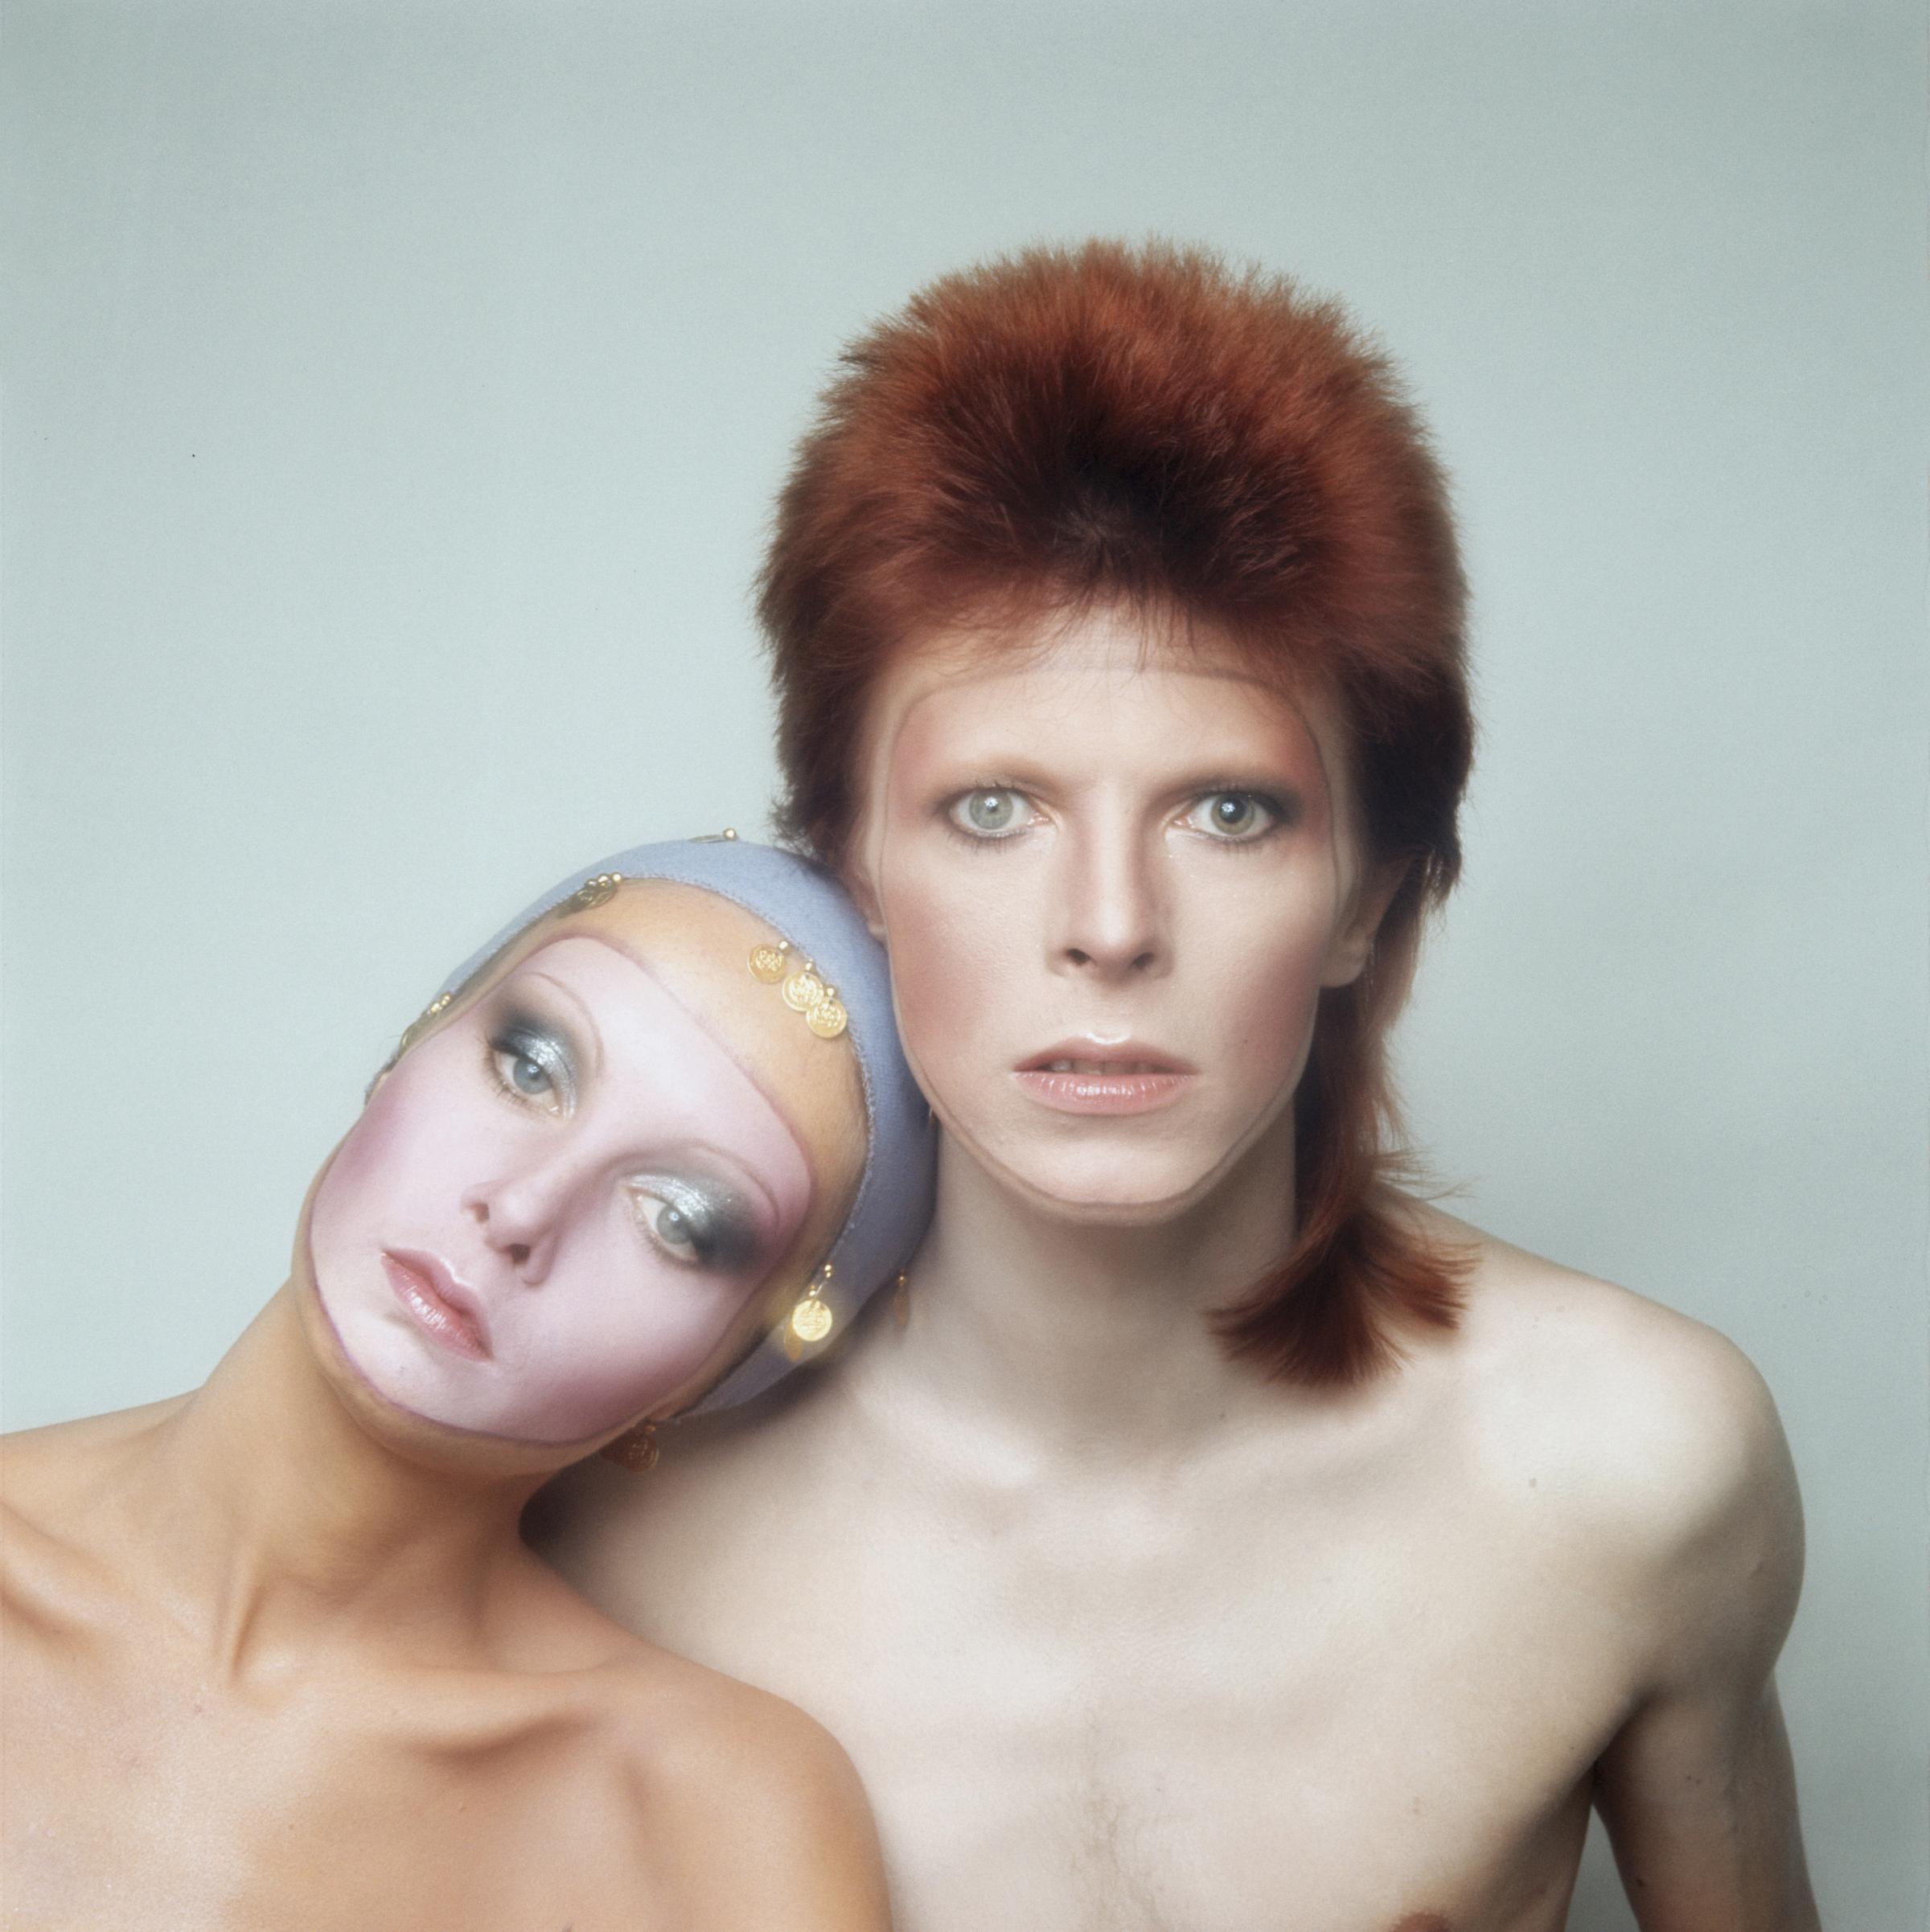 Twiggy poses with David Bowie for the cover of his Pin Ups album in 1973 in Paris.